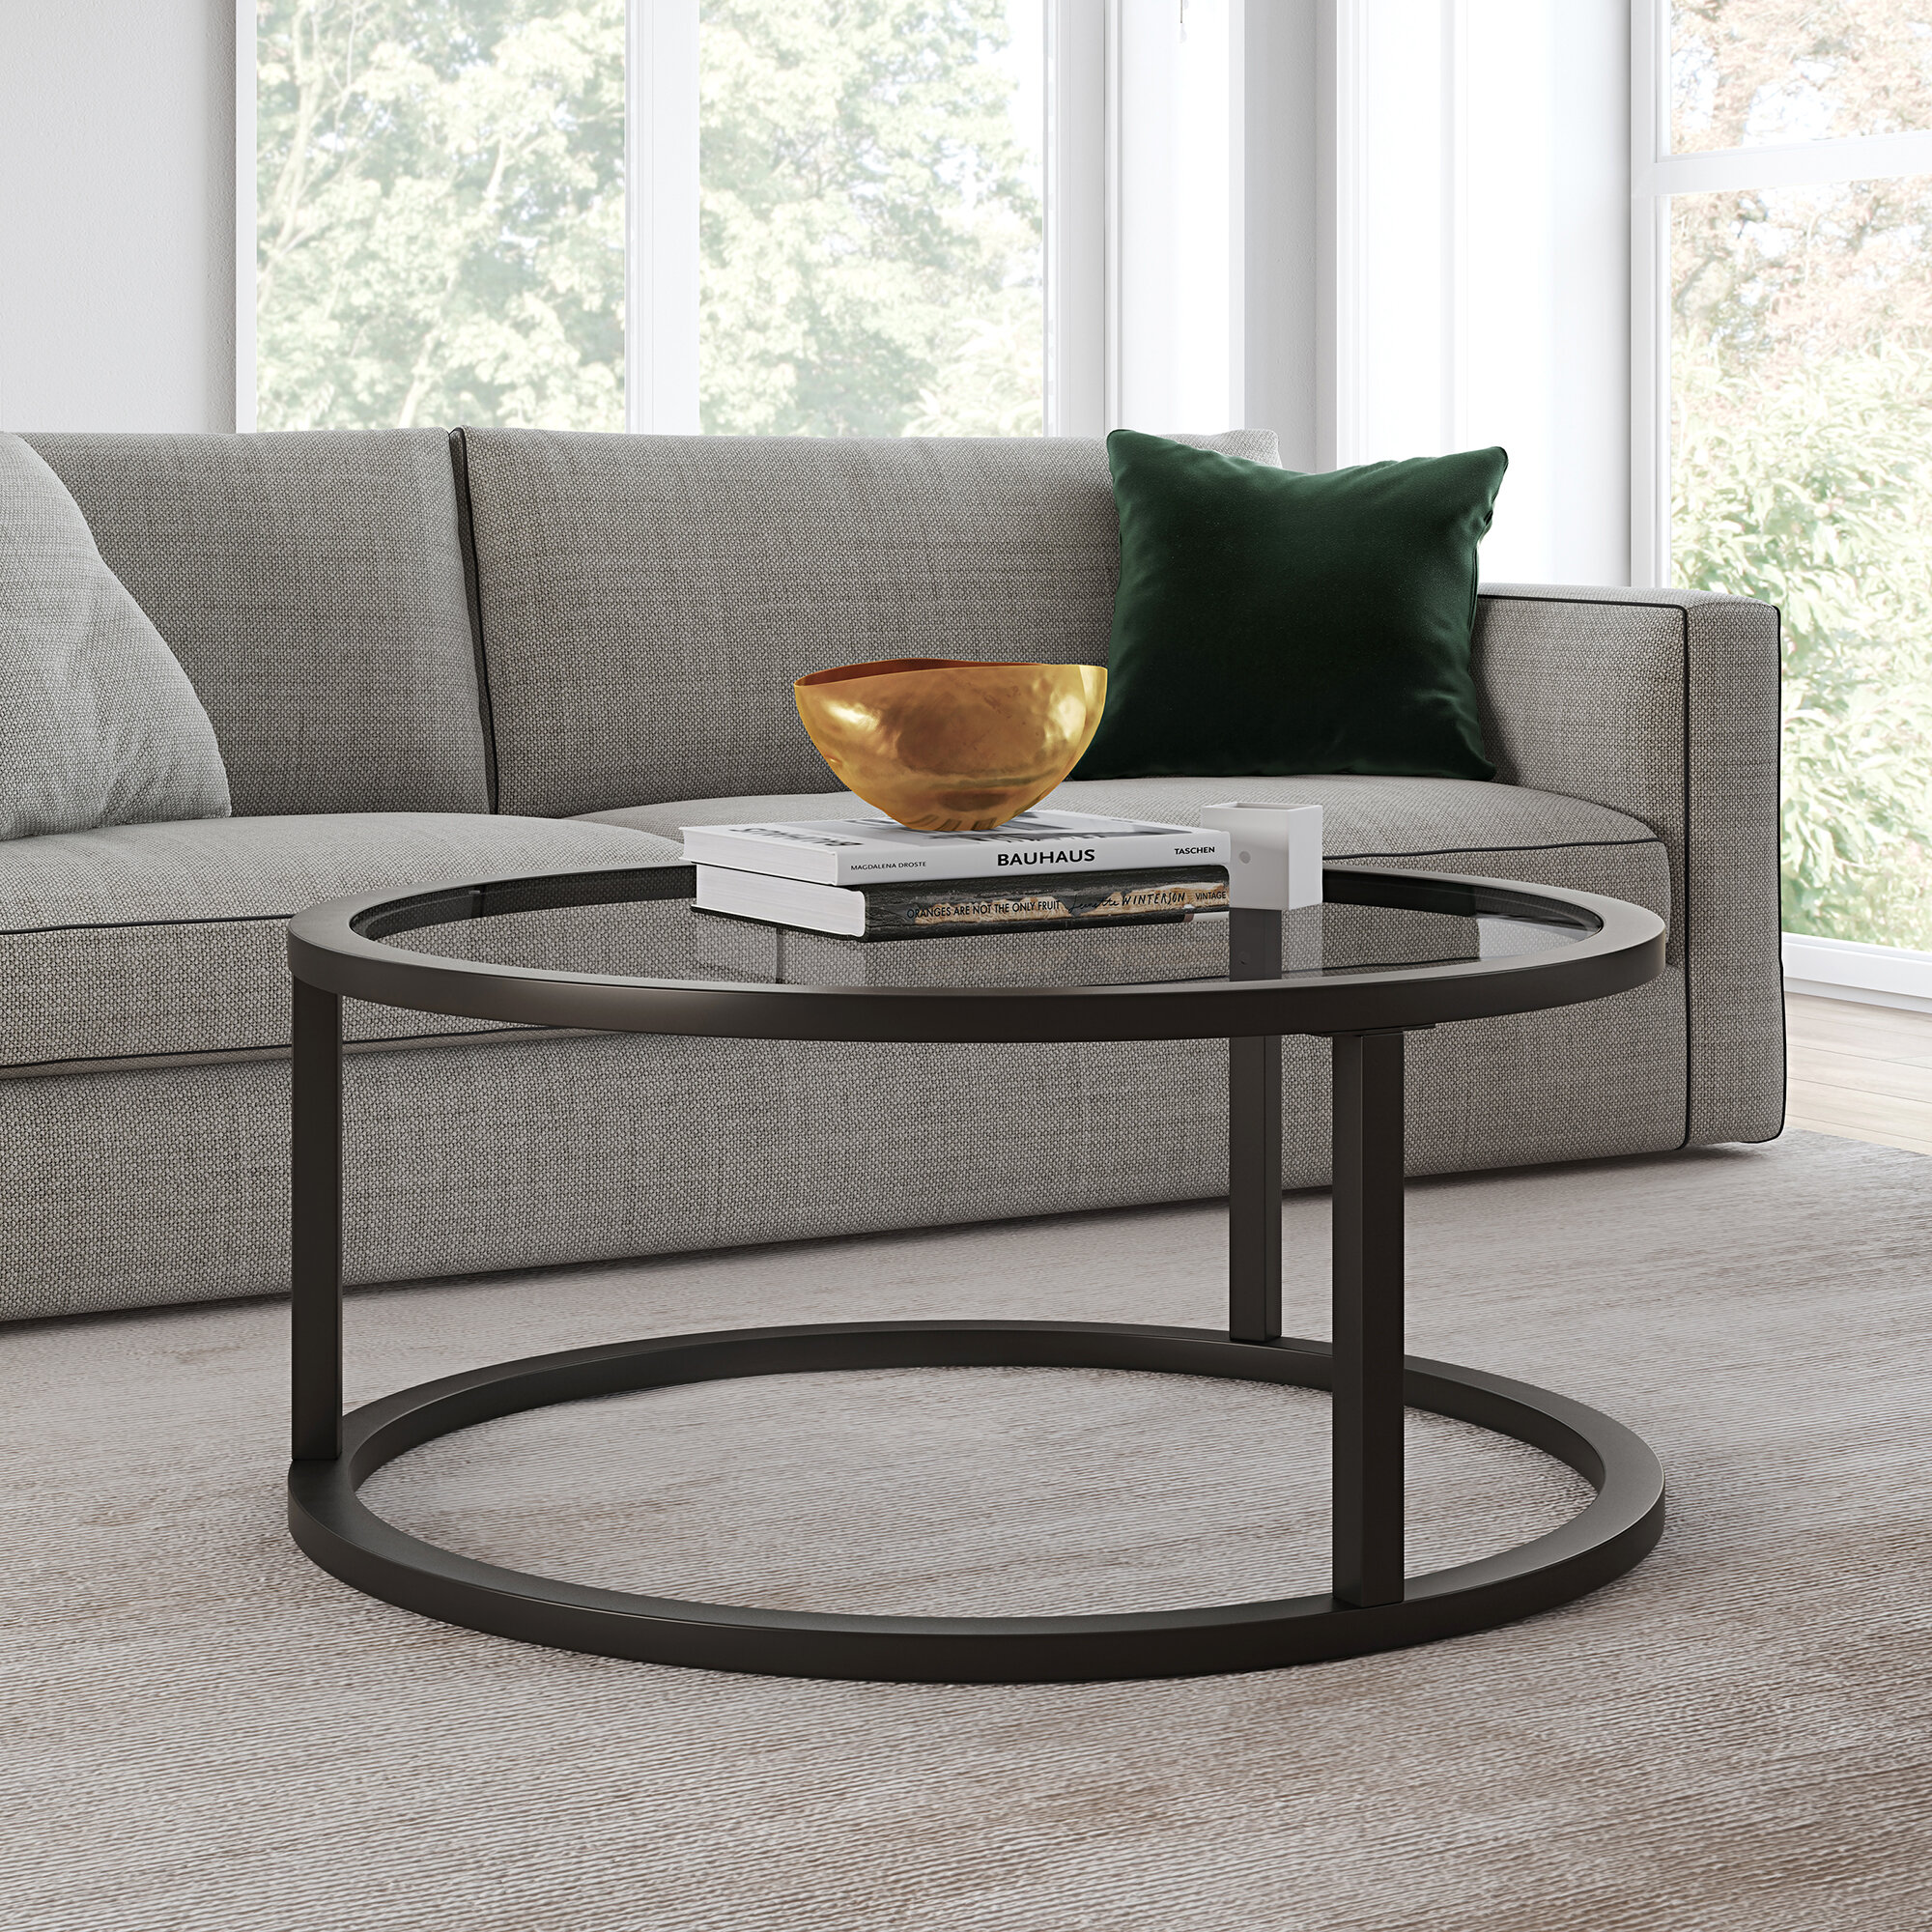 Featured image of post Black Metal And Glass Coffee Table / Mendocino coffee table with glass top: